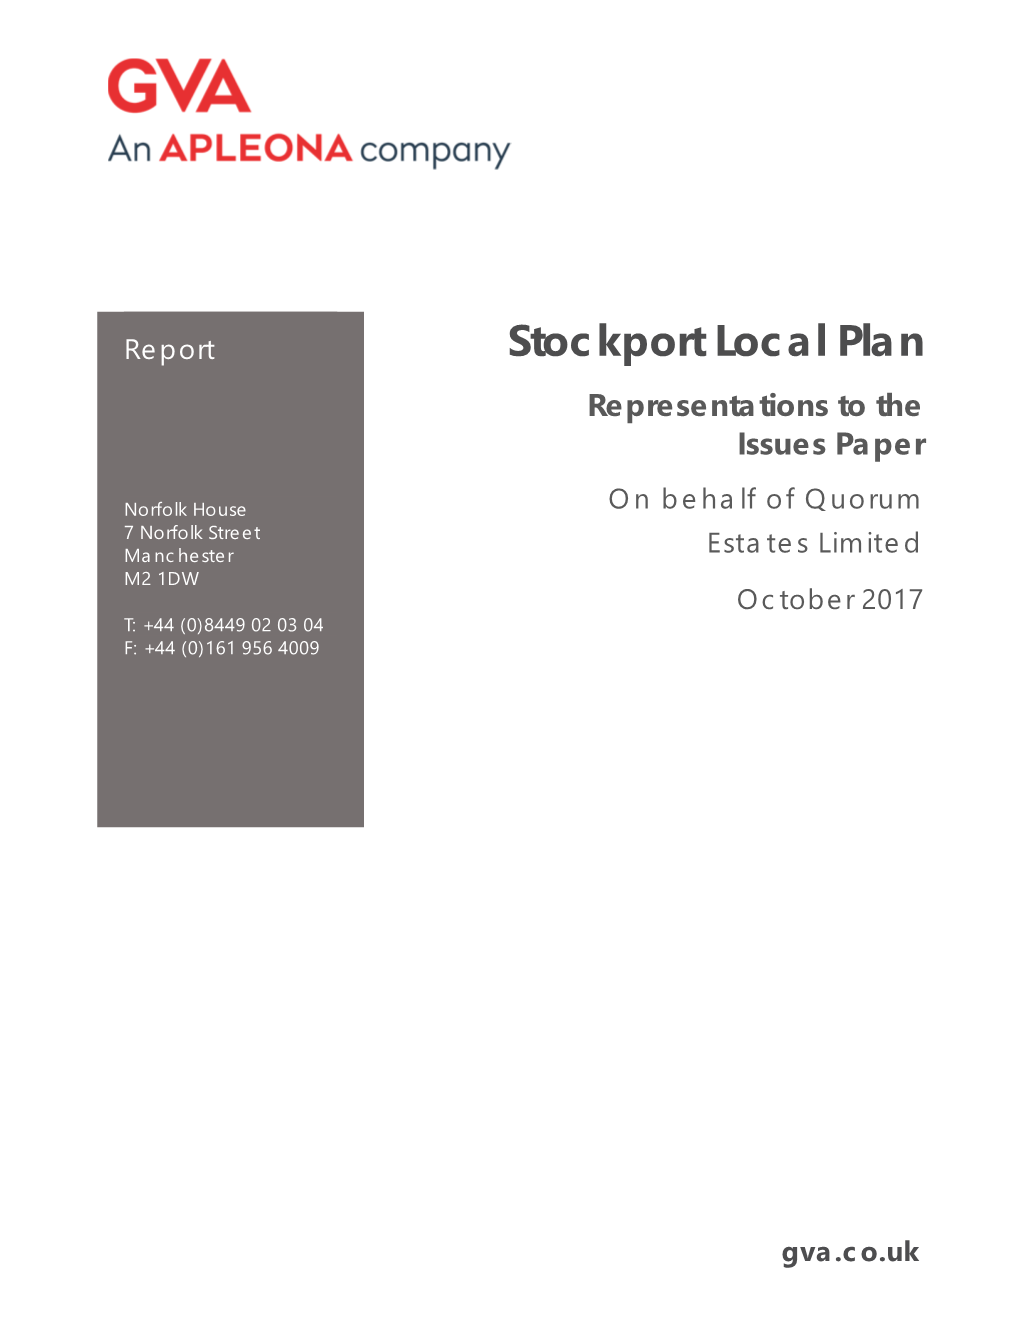 Stockport Local Plan Representations to the Issues Paper